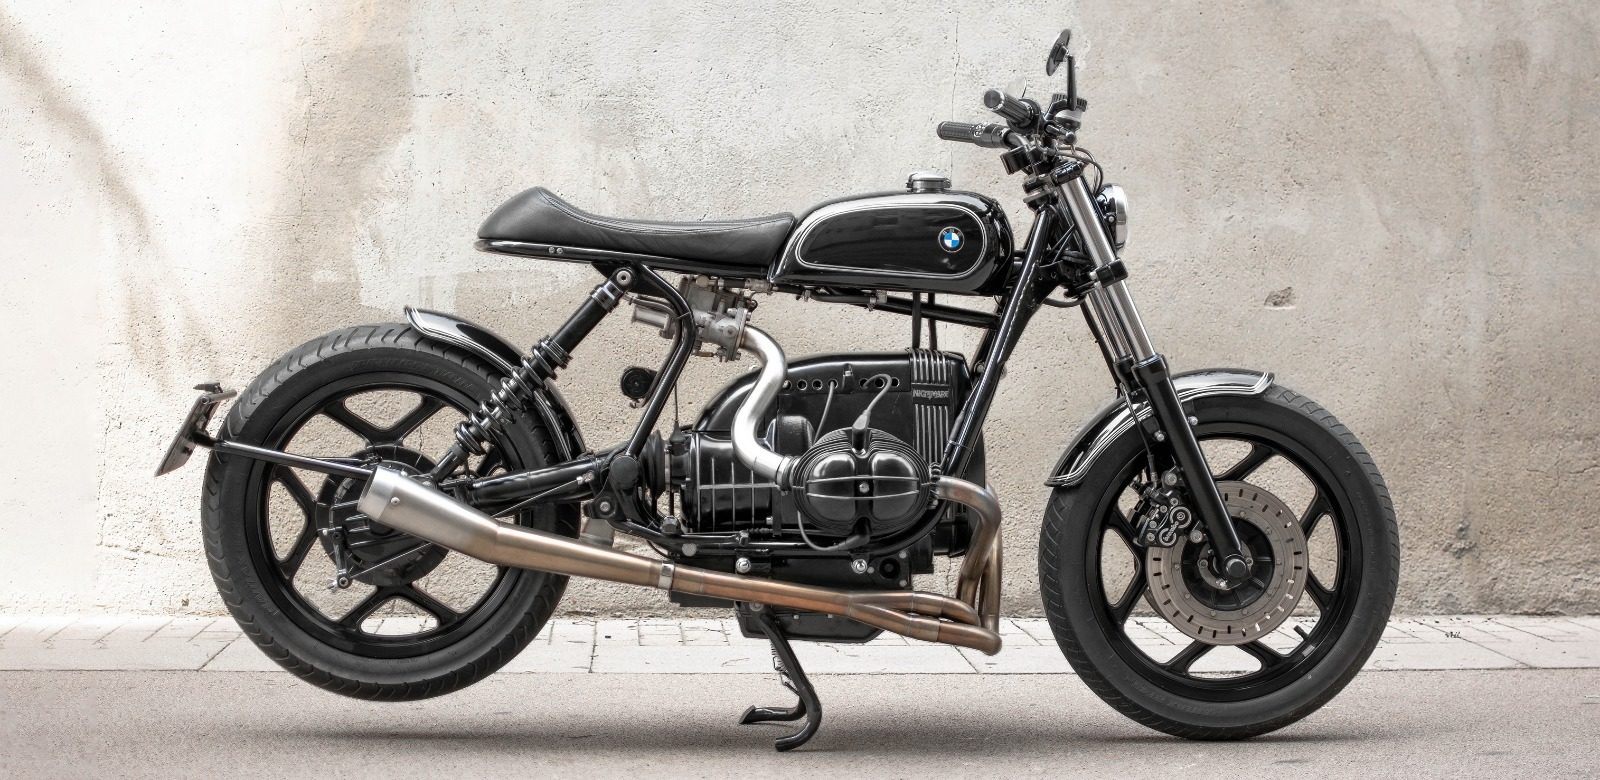 bmw r 80 nightmare looks alluring rather than scary wont haunt your dreams 10